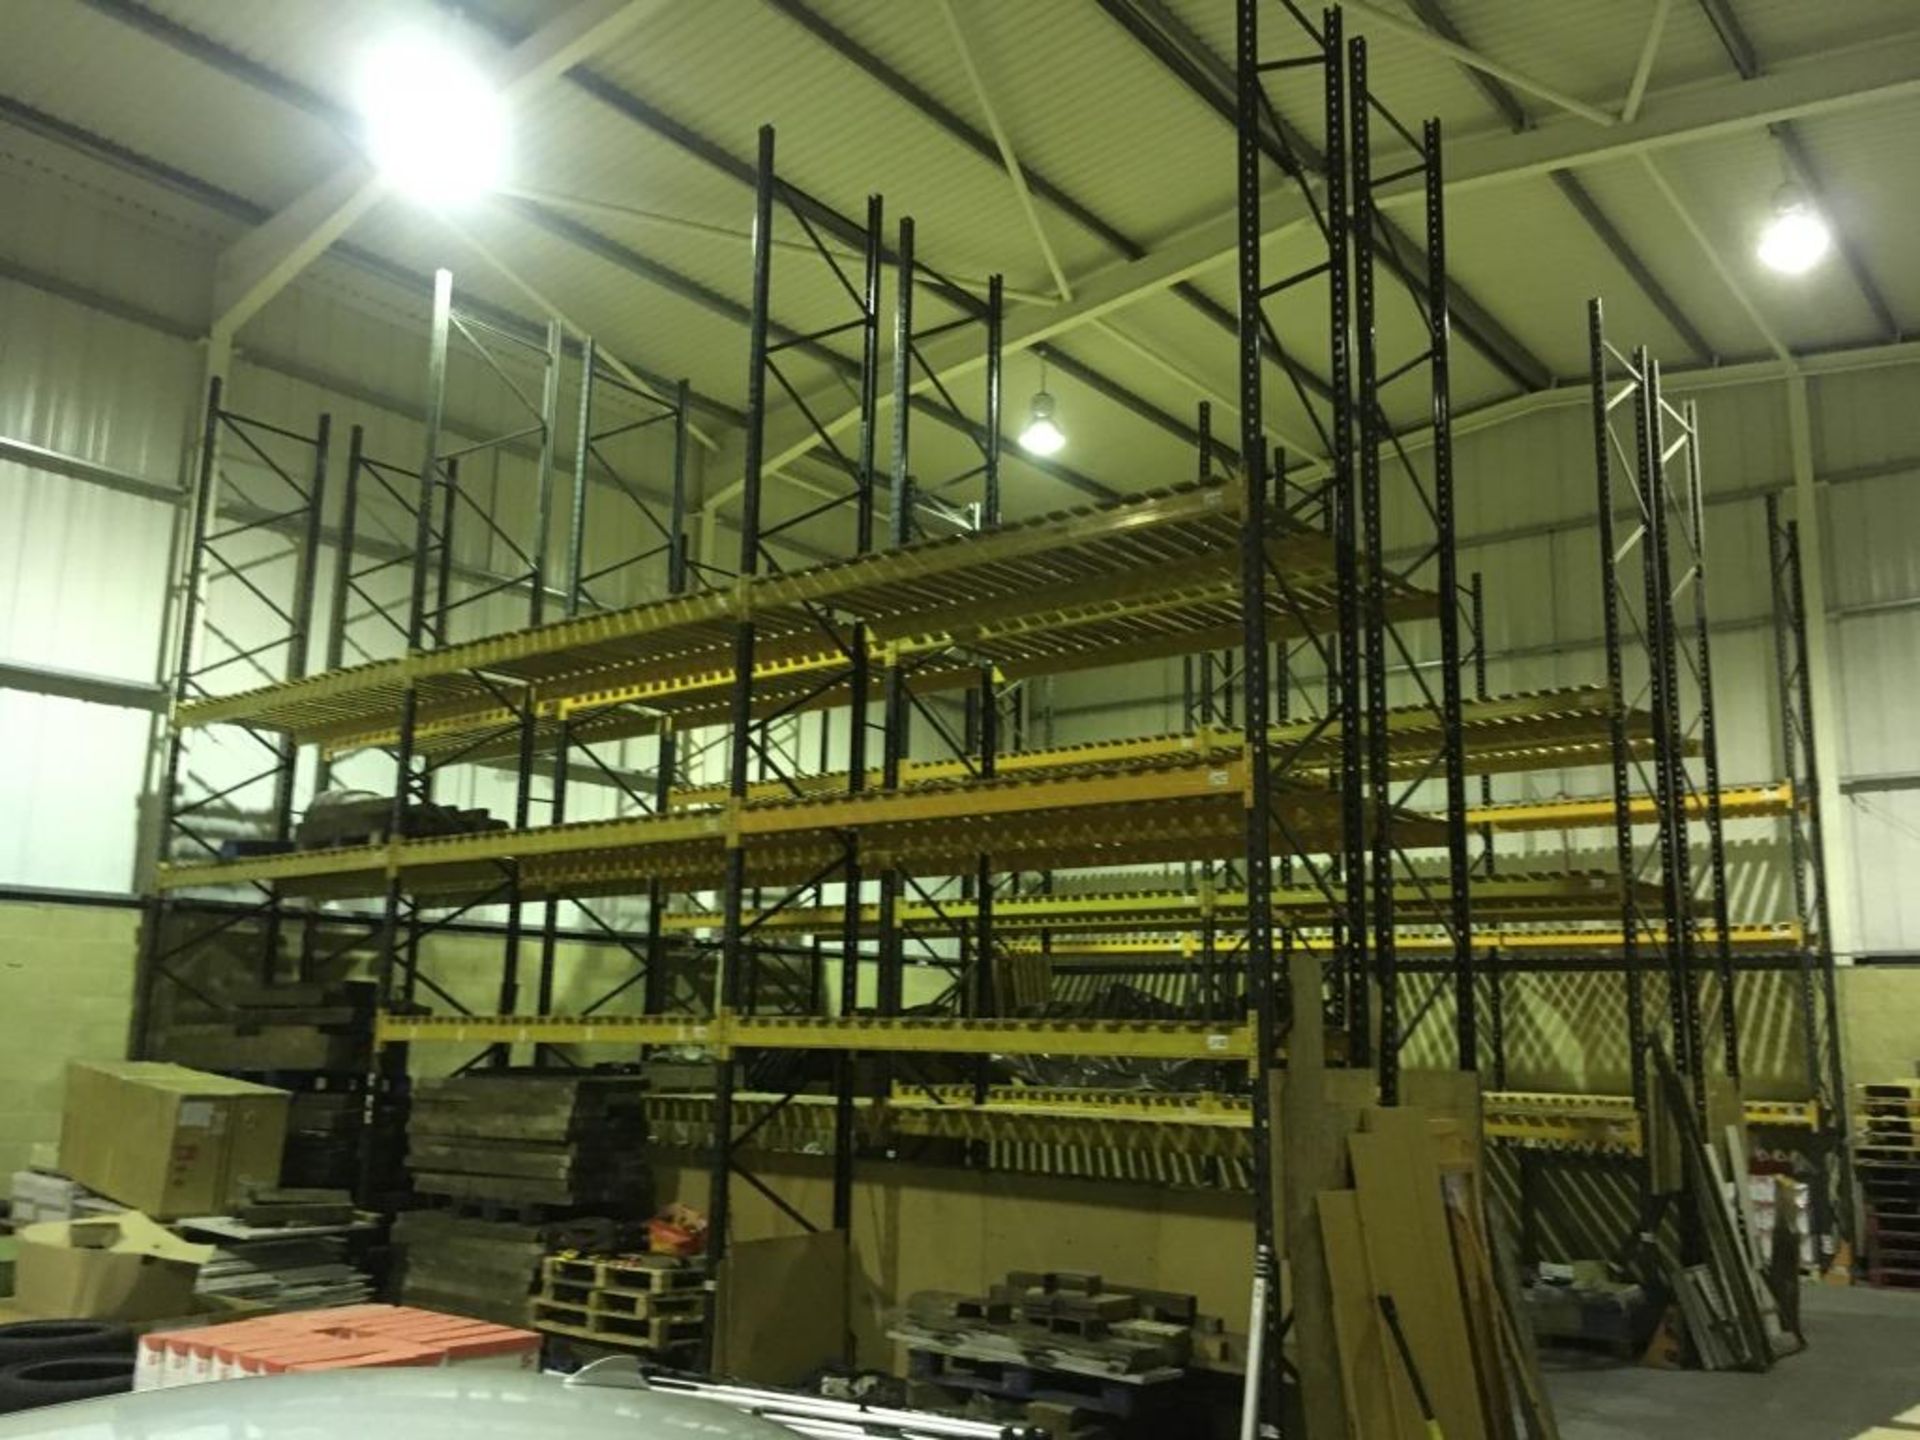 15 bays of boltless racking comprising 20 vertical frames measuring 7.5m tall and 1.1m deep and 86